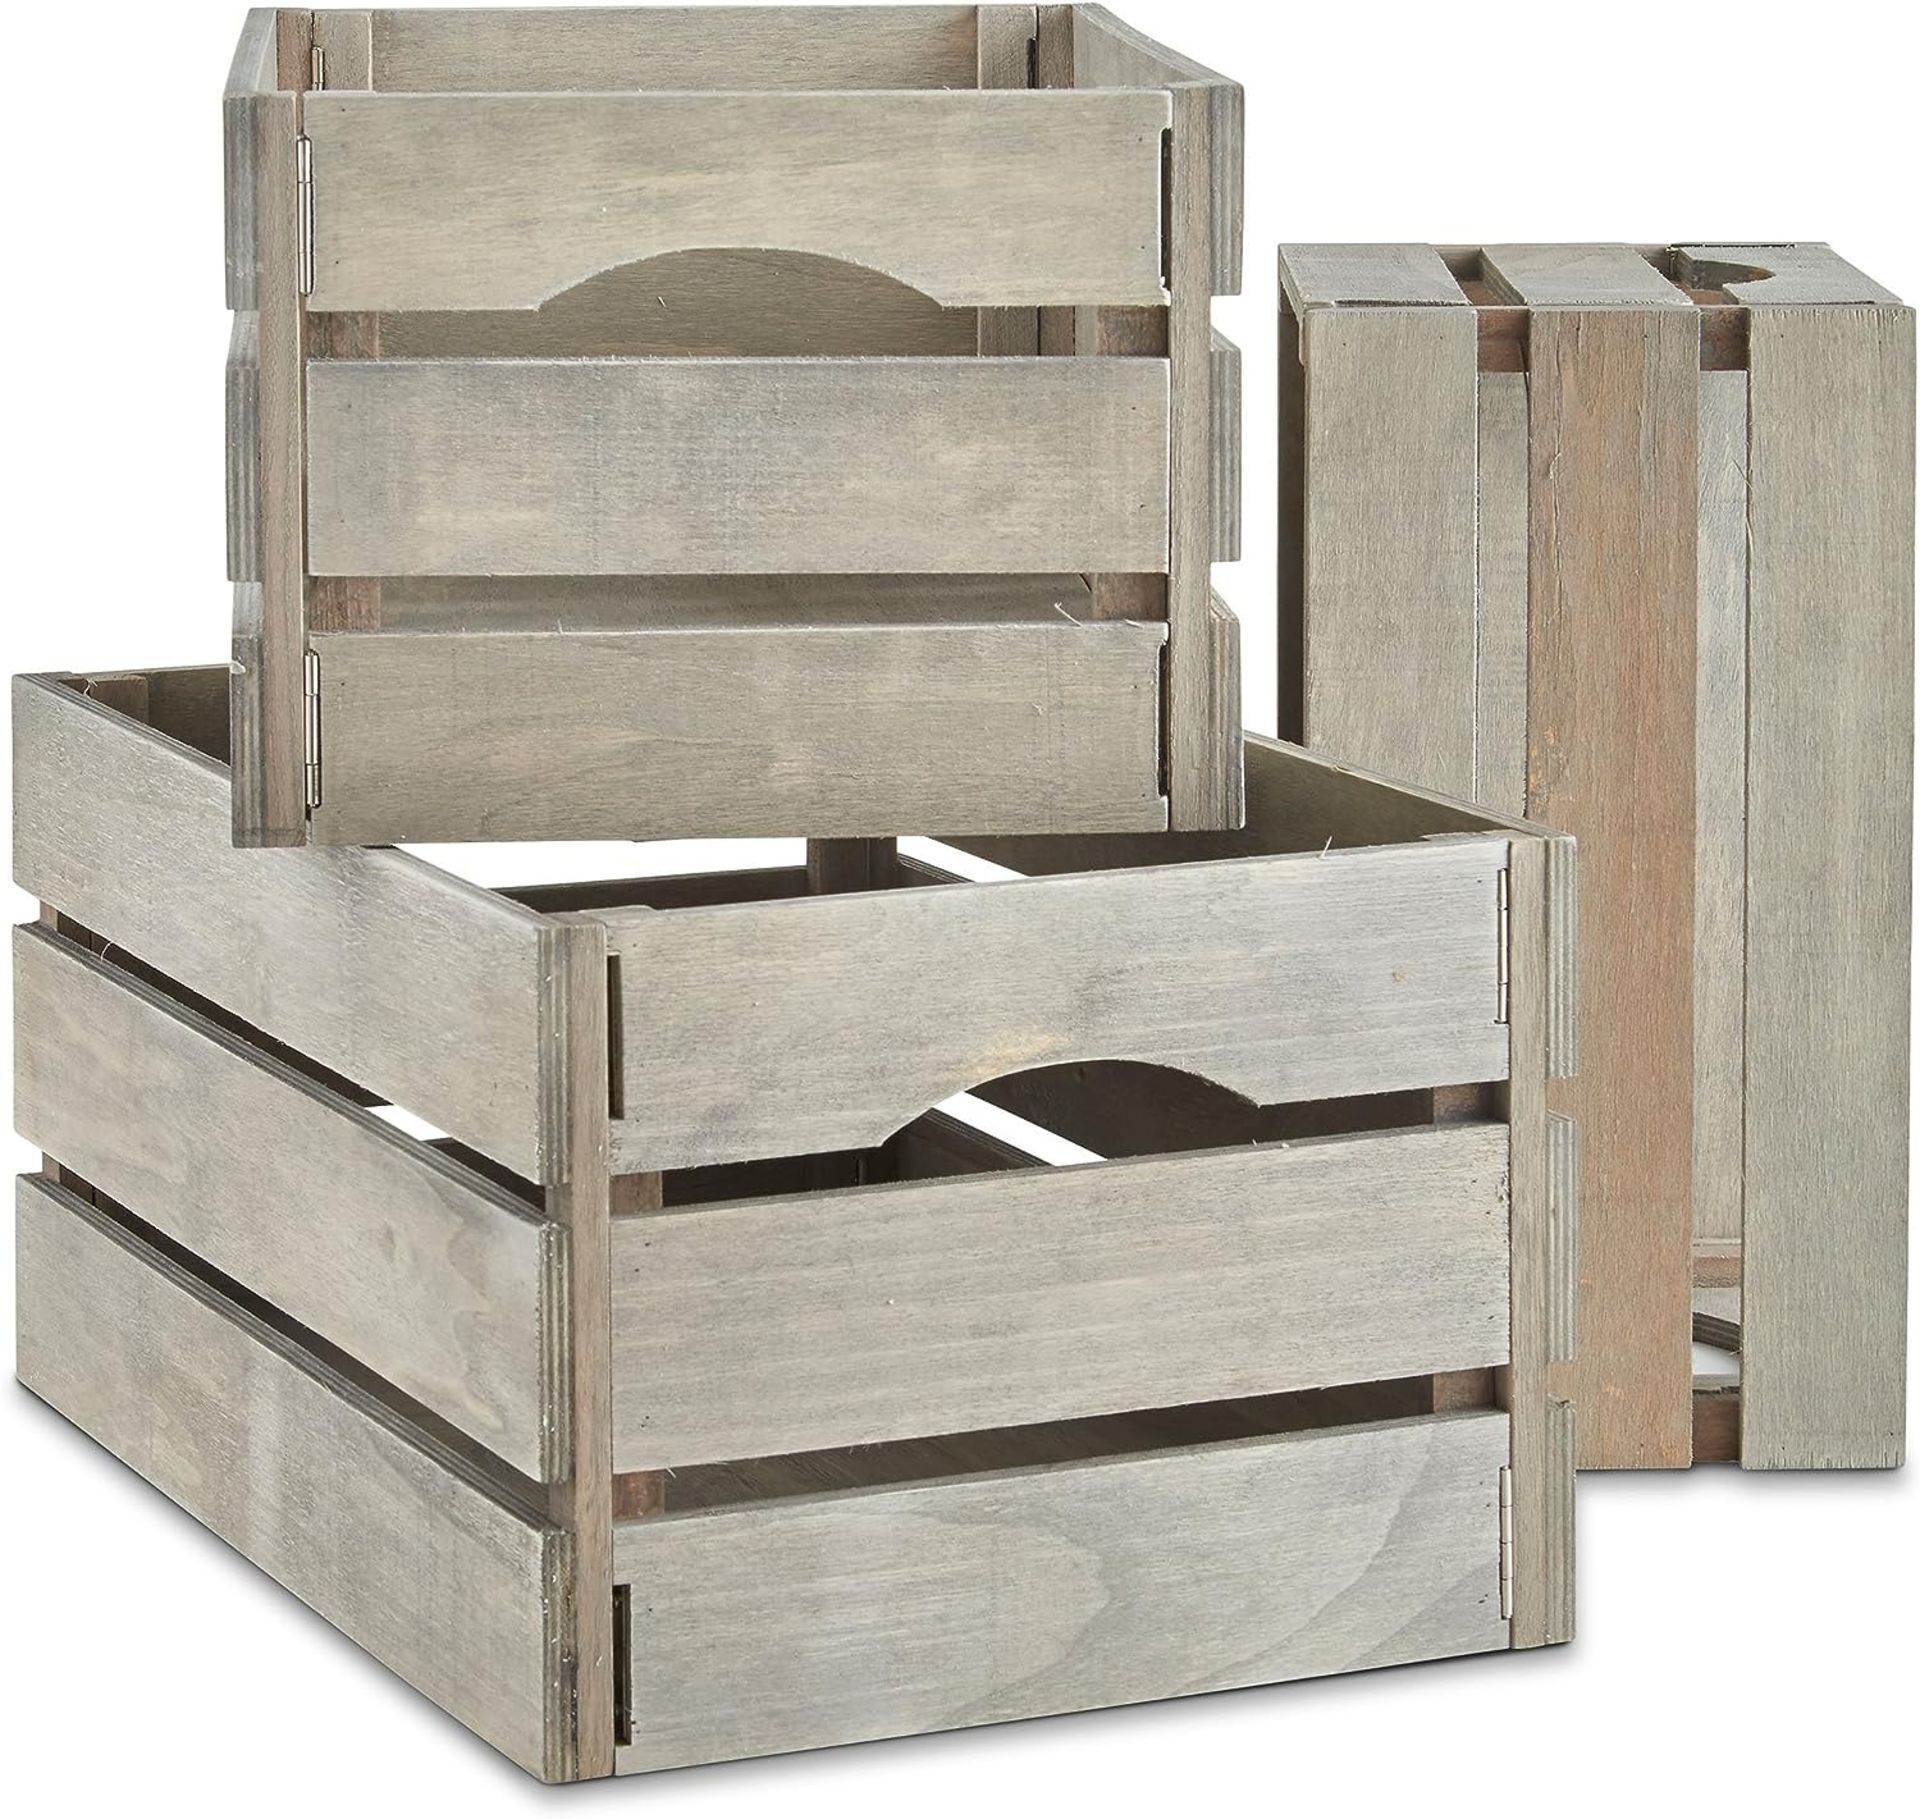 6 X BRAND NEW SETS OF 3 GREY WASHED WOODEN CRATES R2.1